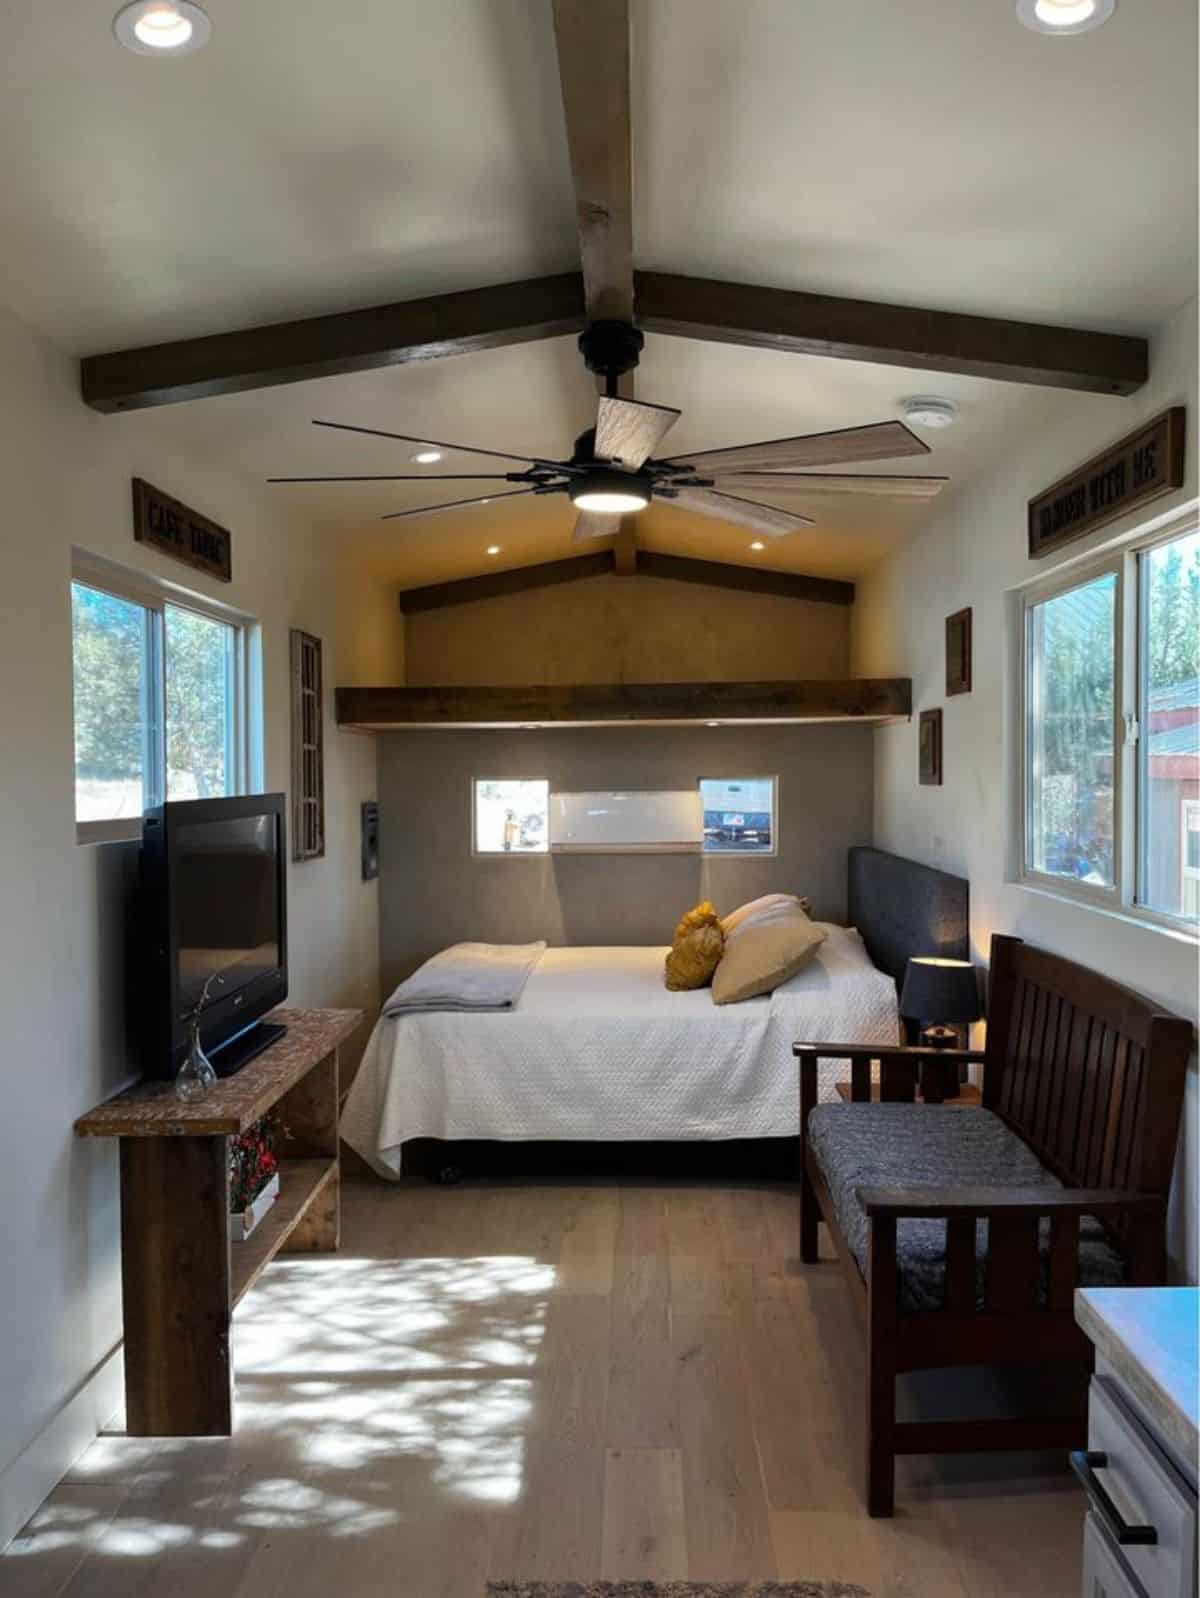 Open bedroom area of newly constructed 30’ tiny home has a huge fan and air condition unit